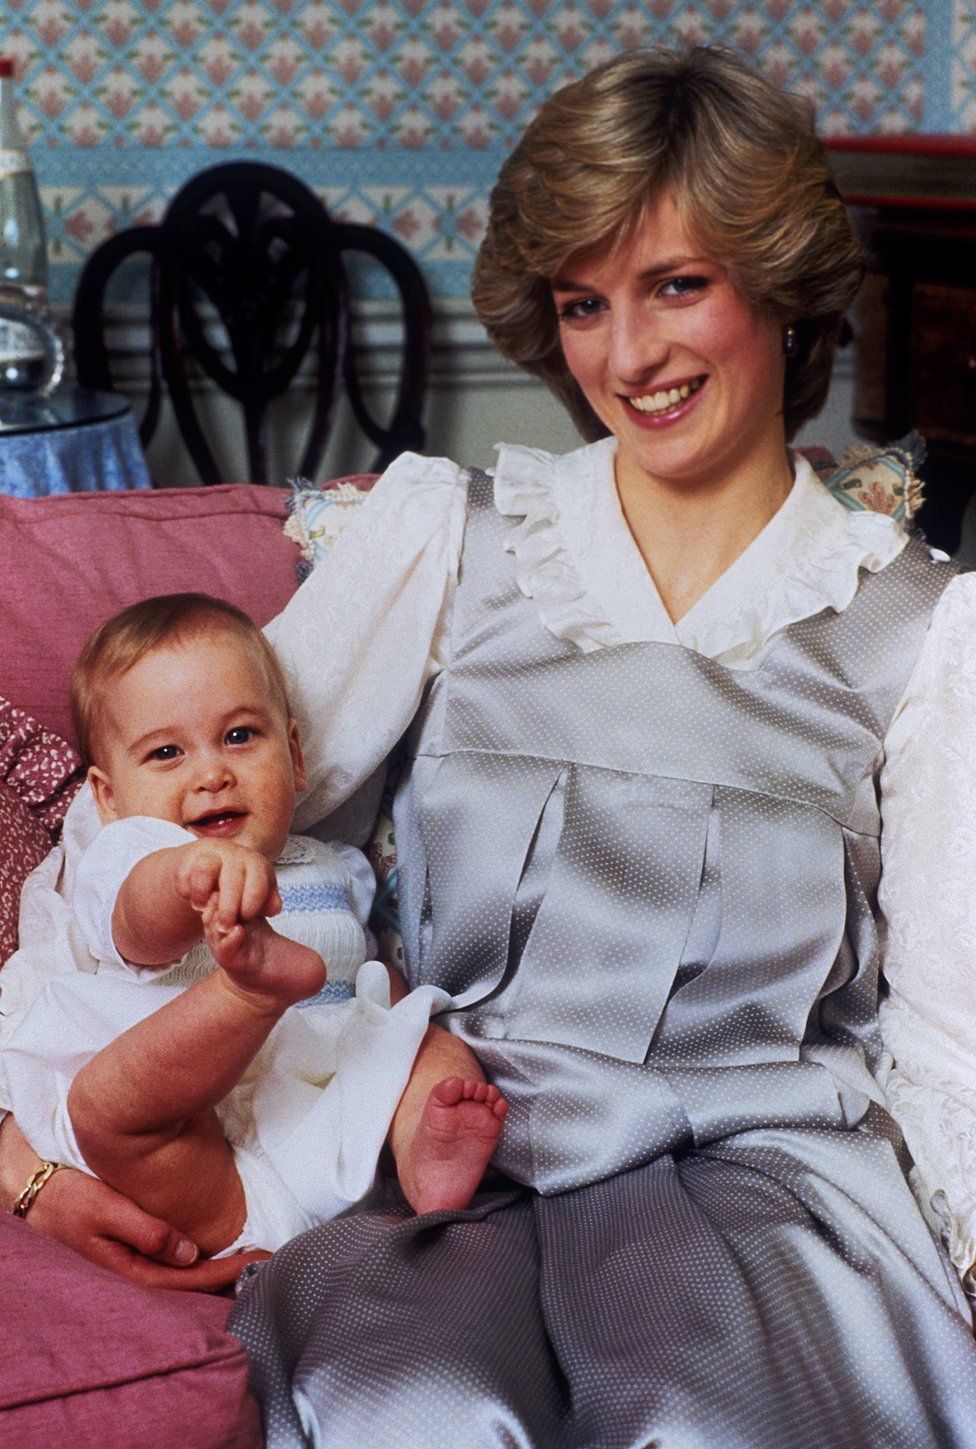 A baby Prince William with his mother, The Princess of Wales, at home in Kensington Palace, London